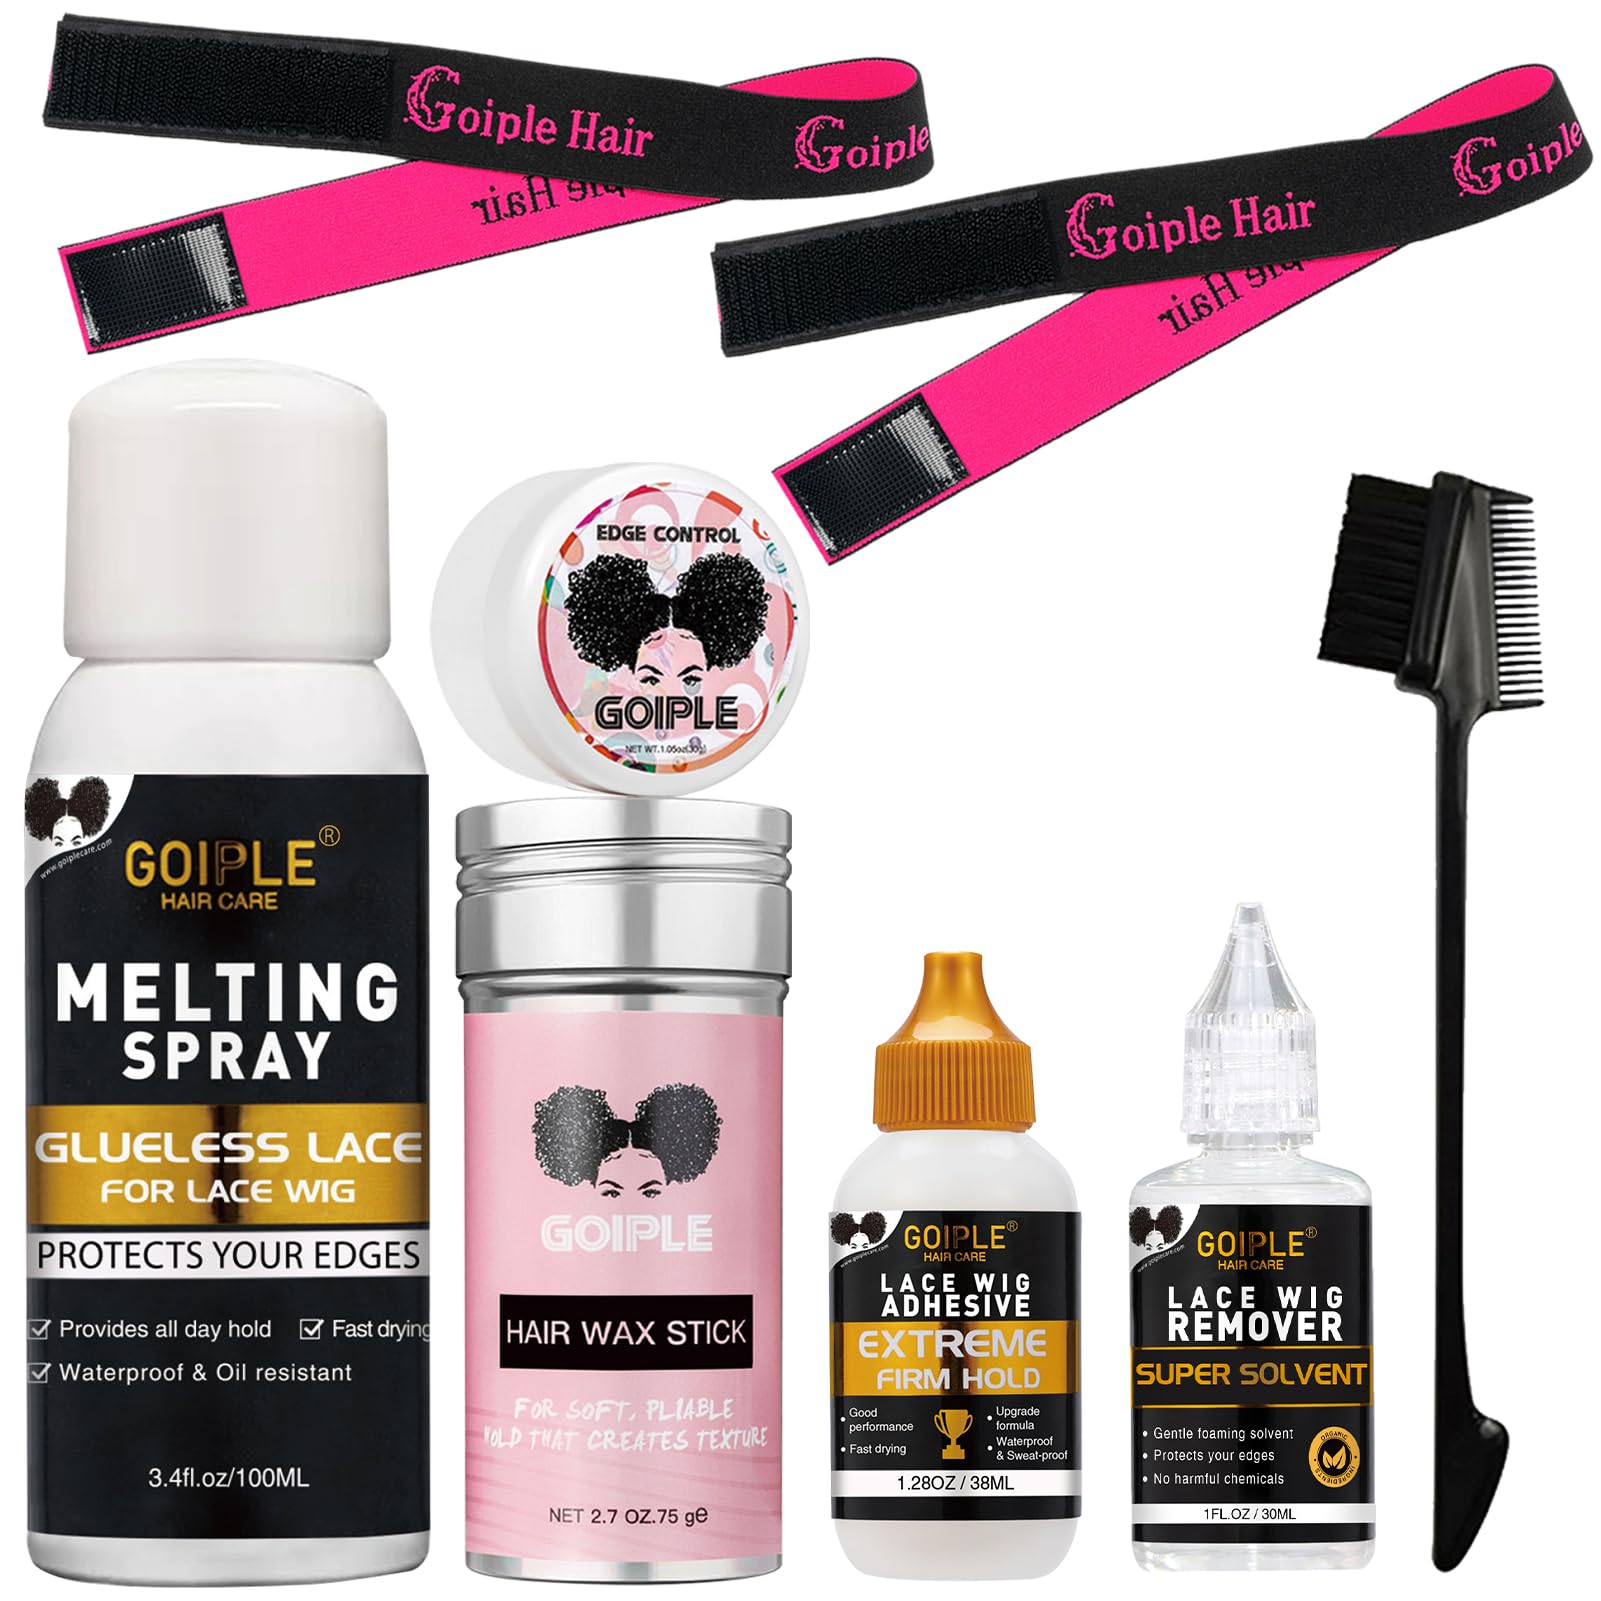 Wig Glue Lace Glue for Lace Front Wigs, Waterproof Lace Wig Glue with Tools and Lace Melting Spray Hair Wax Stick(Wig Glue/Wig Glue Remover/Edge Control/Pink Elastic Bands*2/Hair Dual Drush)